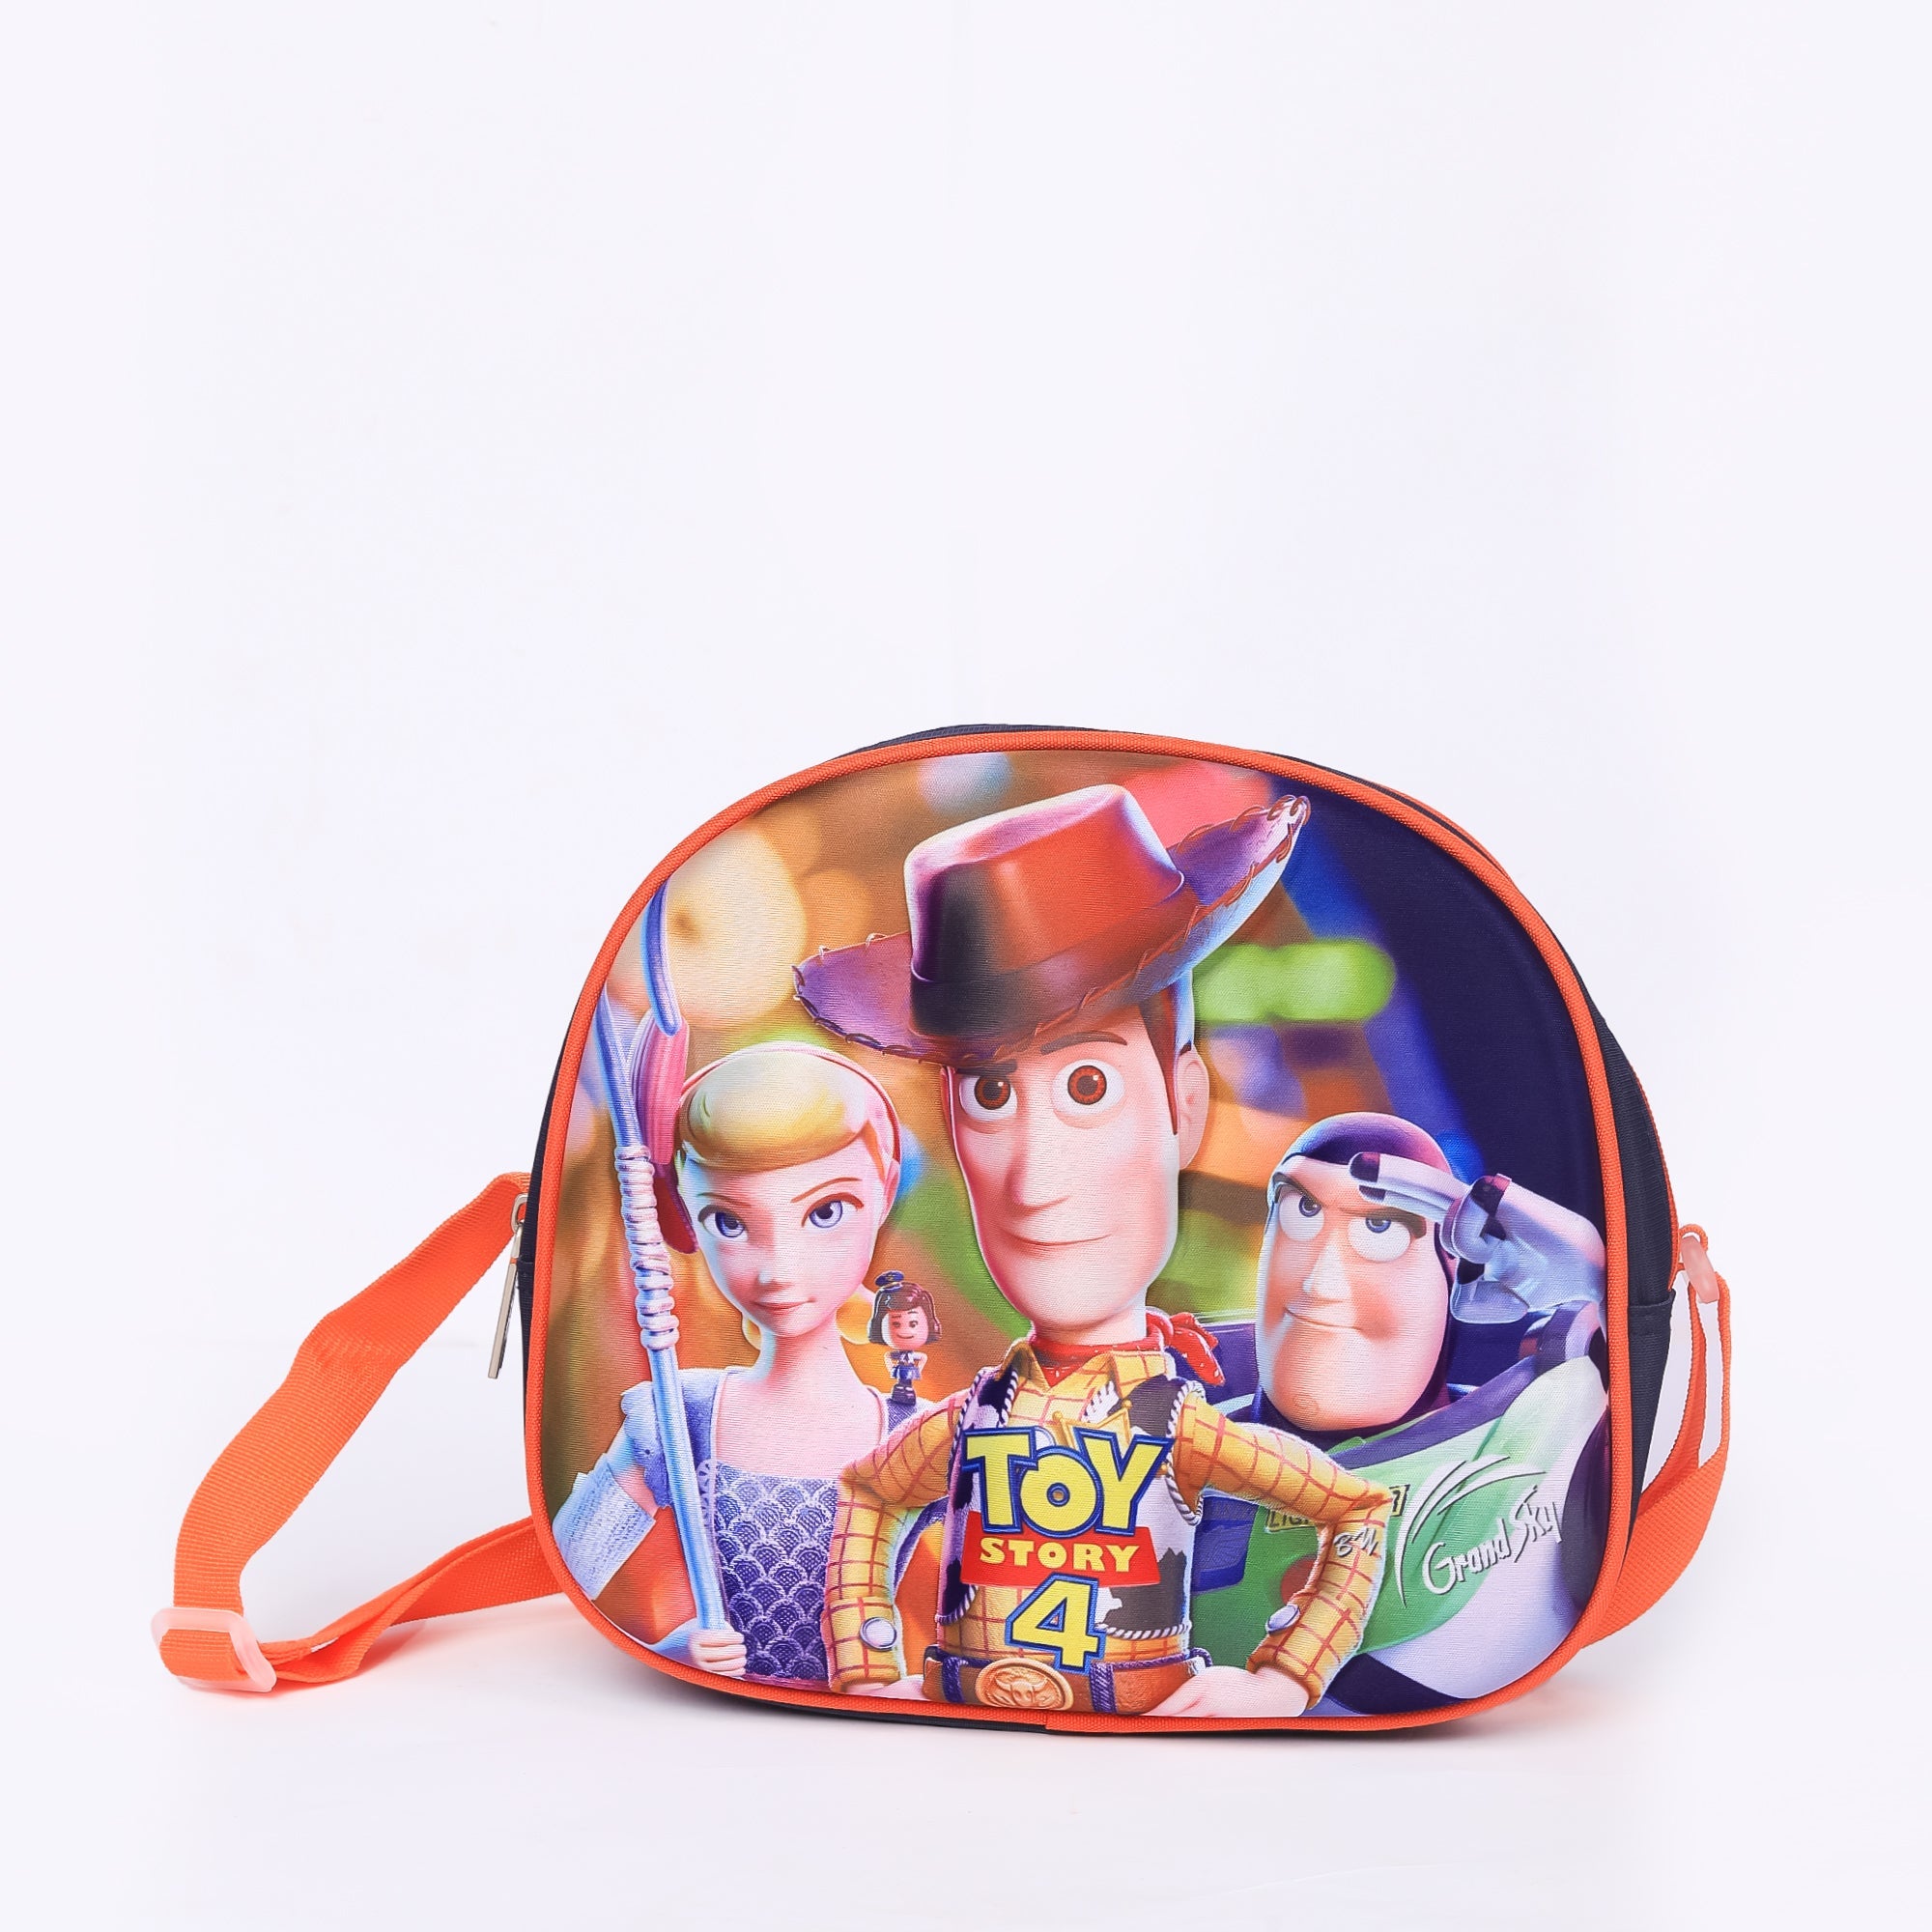 Toy Story 2 Trolly Bag For Kids 17 INCH